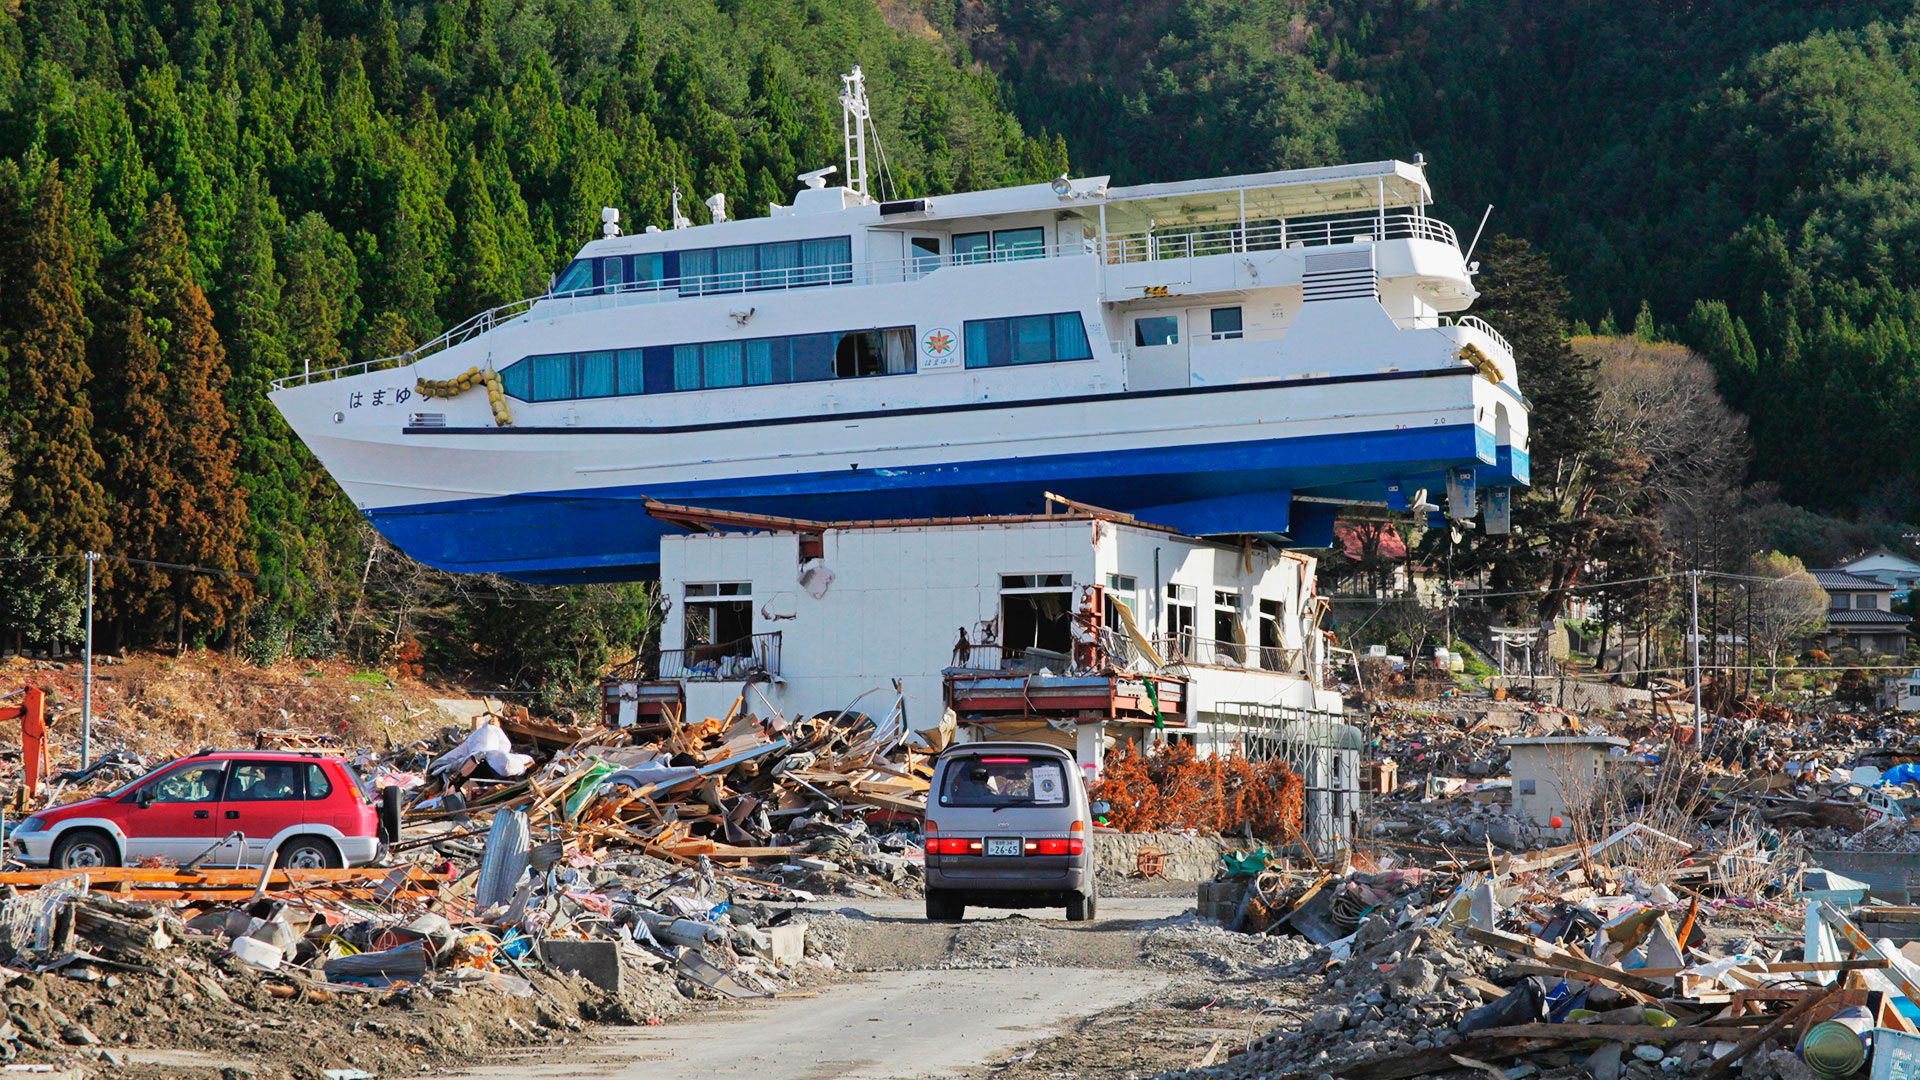 A sight-seeing vessel is seen atop a building in Otsuchi, Japan after being heaved ashore by the Tōhoku Tsunami in 2011.